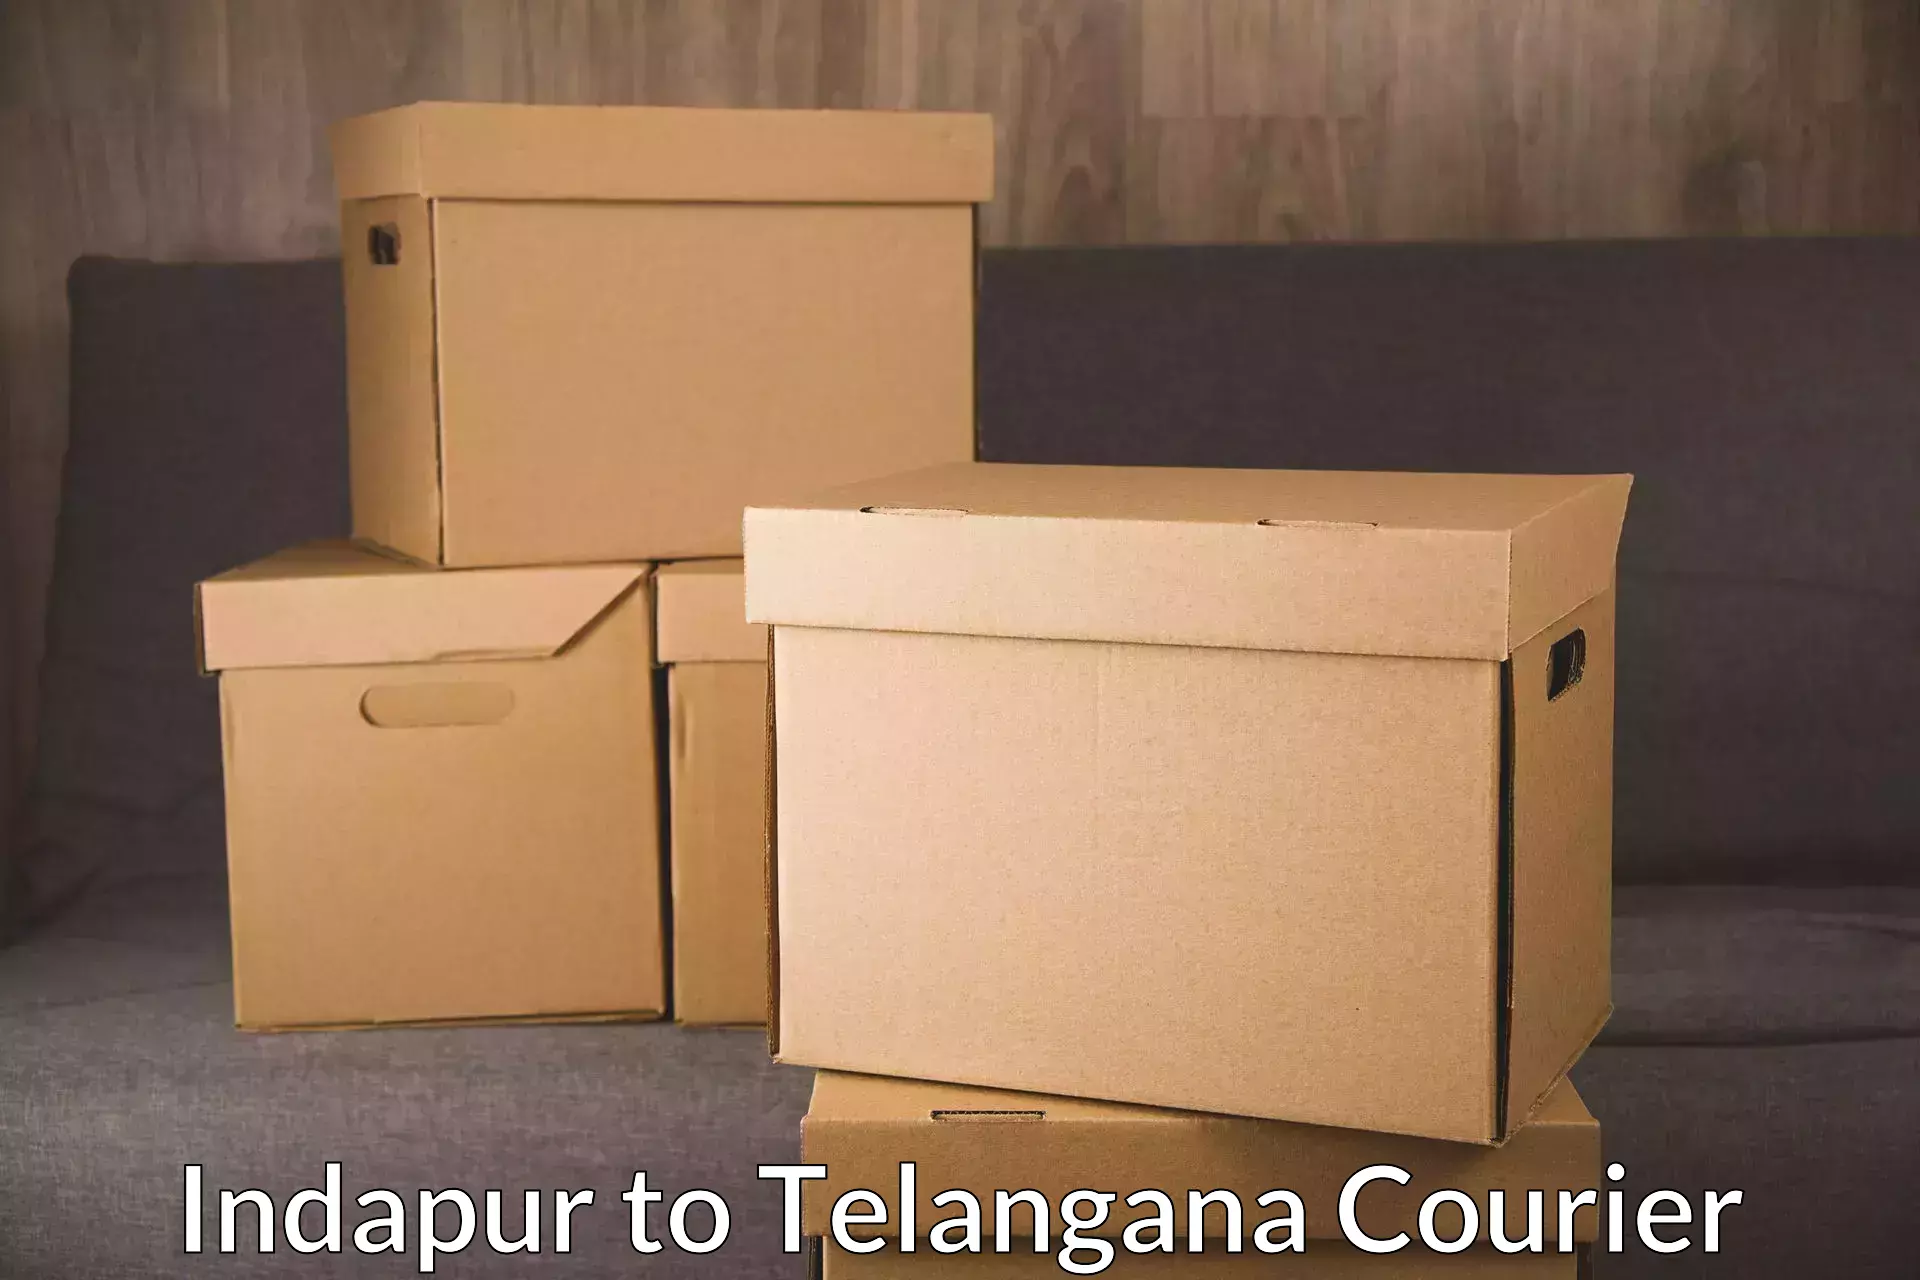 Courier service comparison in Indapur to Jagtial